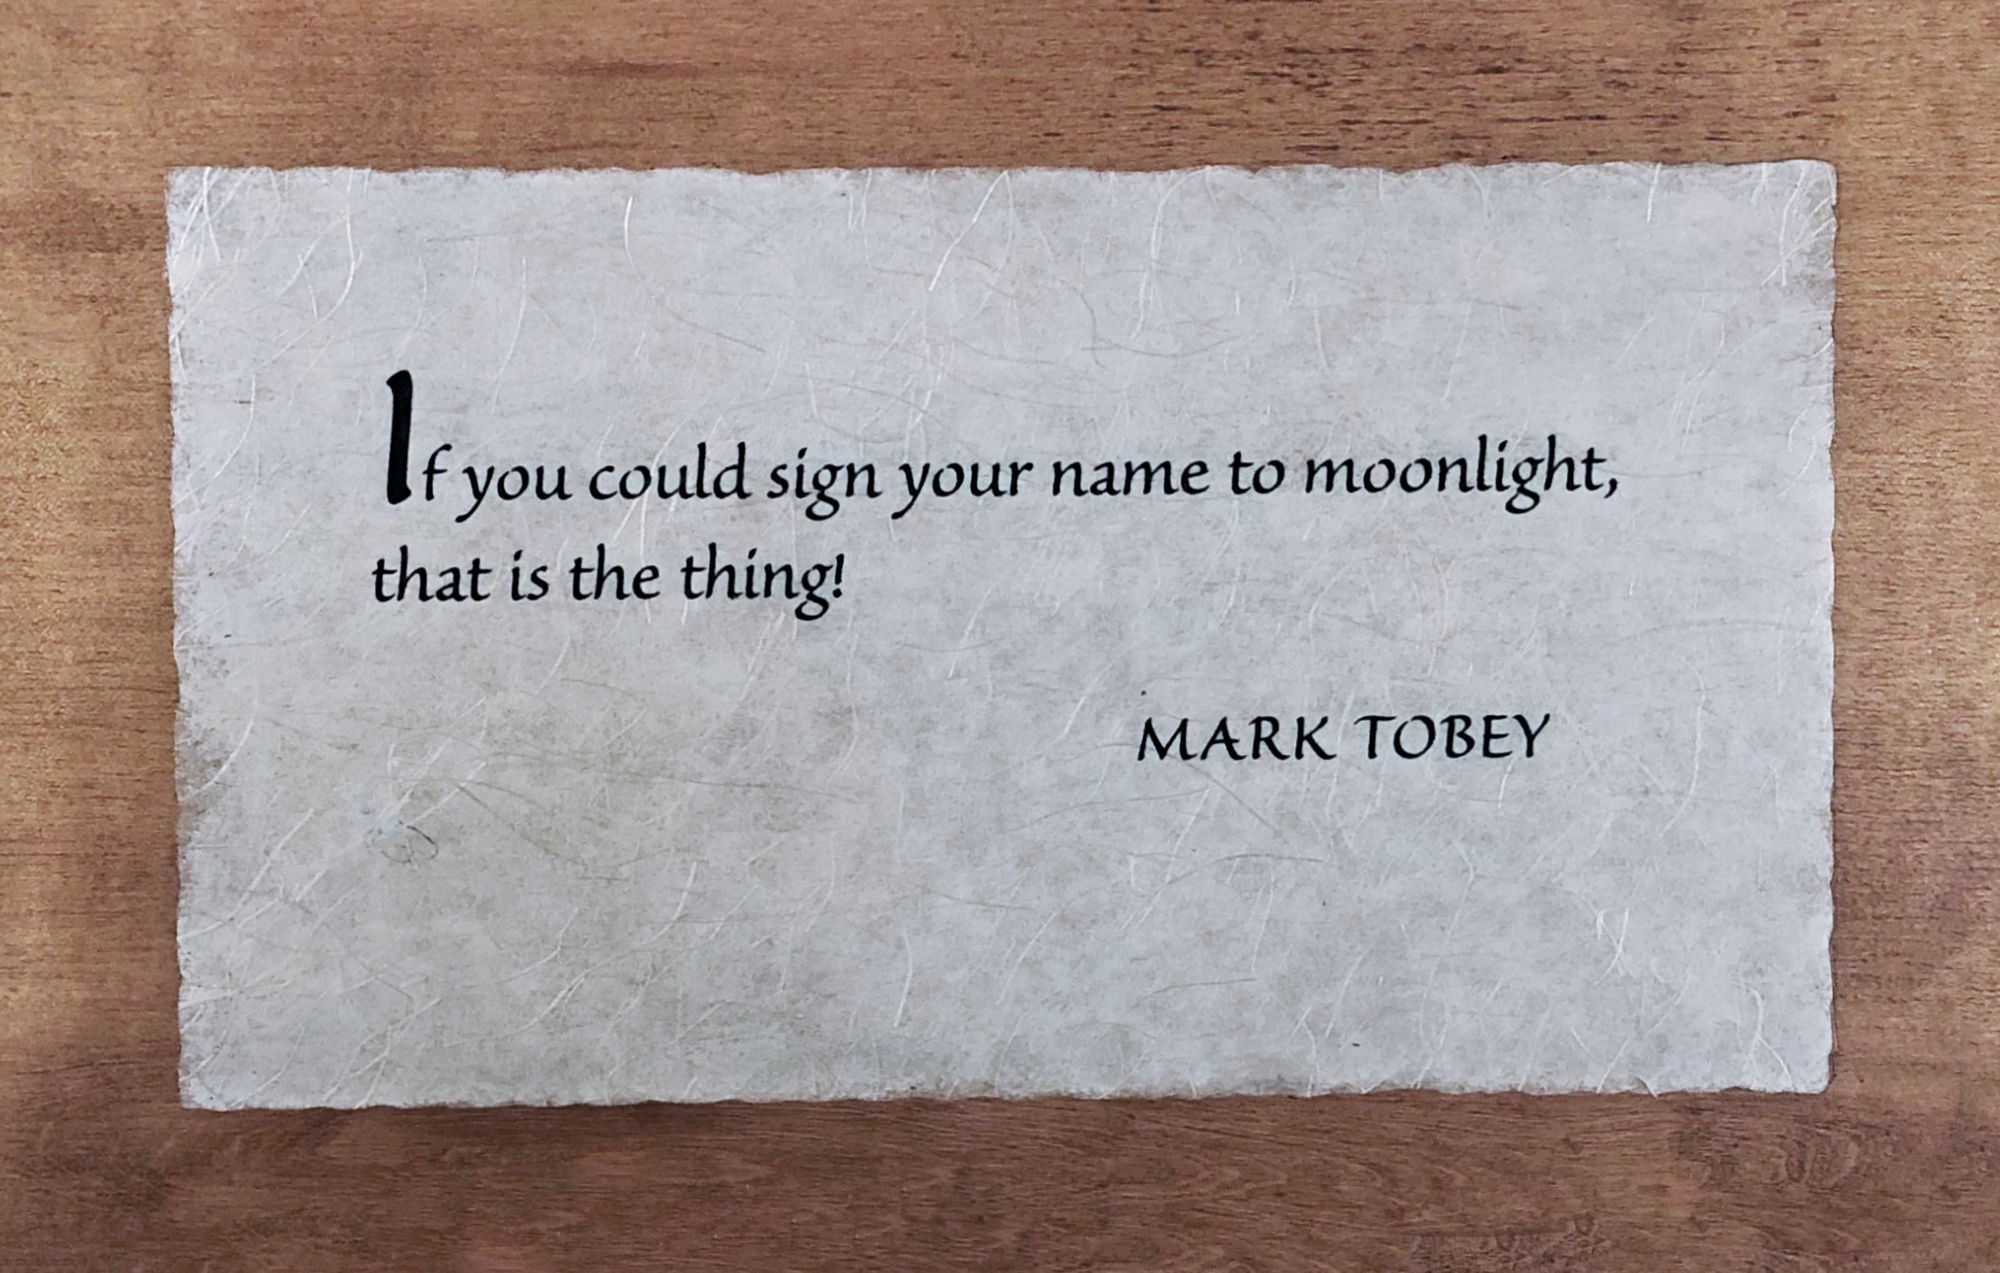 Photo of wooden plaque with Mark Tobey quote: “If you could sign your name to moonlight—that is the thing!”